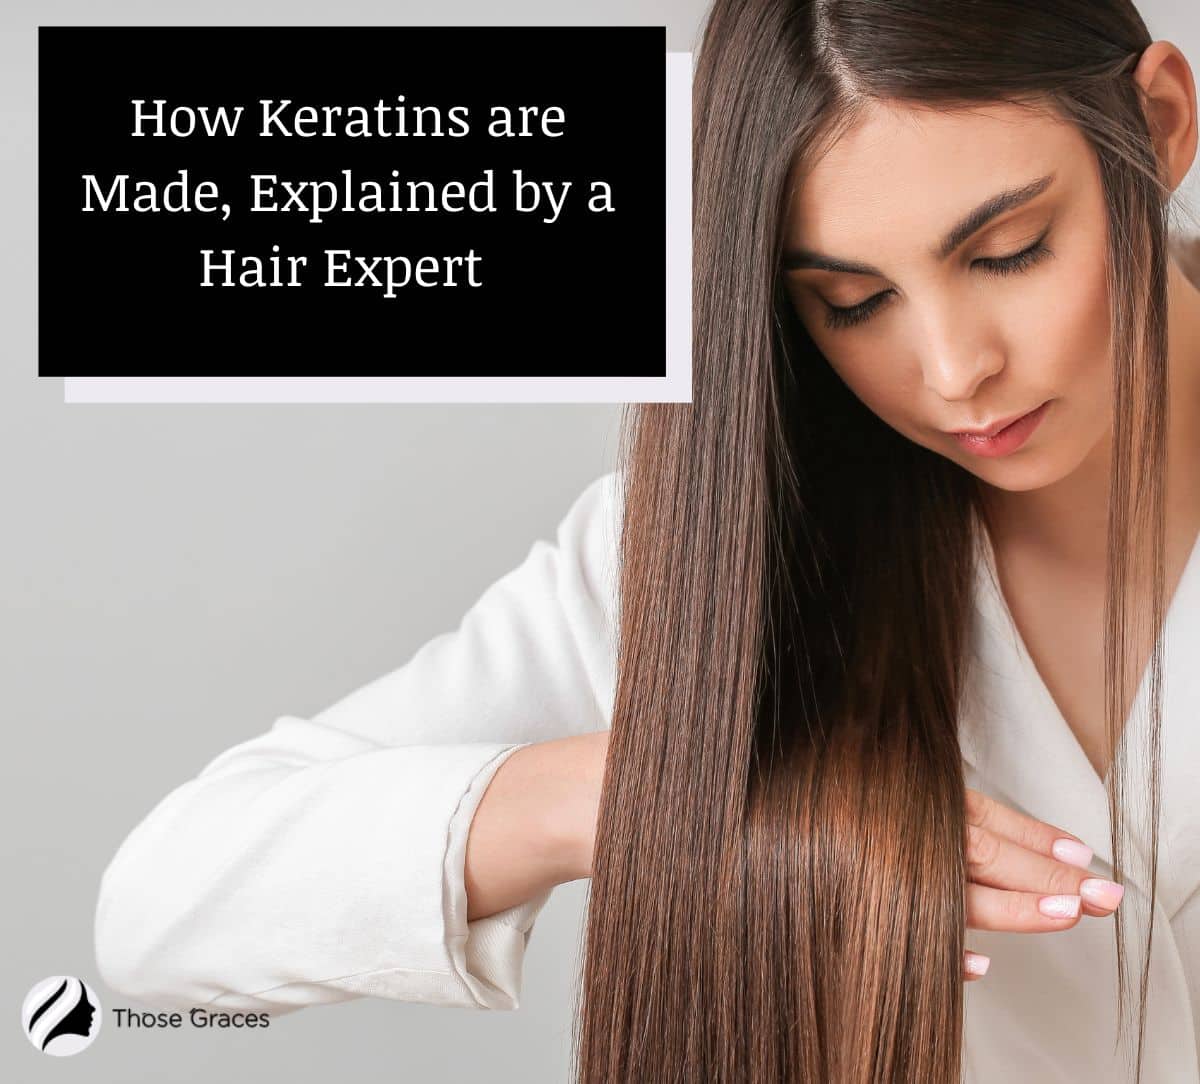 LADY with a straight long hair thinking How Keratins are Made